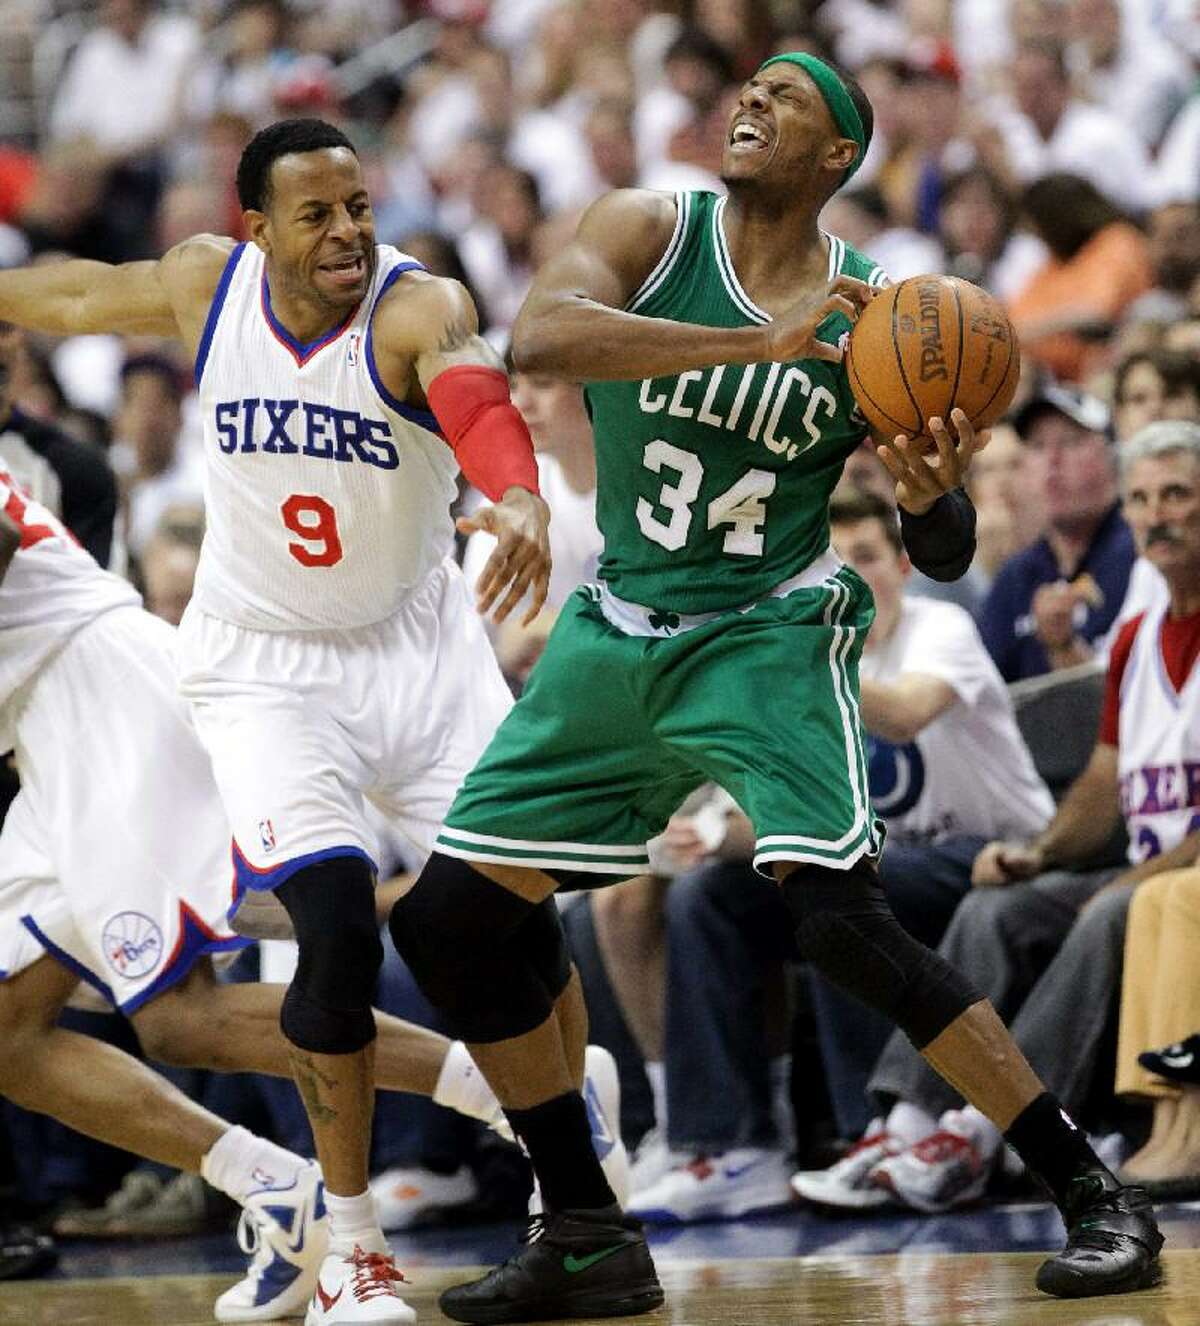 ASSOCIATED PRESS 76ers forward Andre Iguodala smacks across the face of Celtics forward Paul Pierce during Game 3 of their Eastern Conference semifinal series. The teams meet in Game 5 on Monday in Boston.